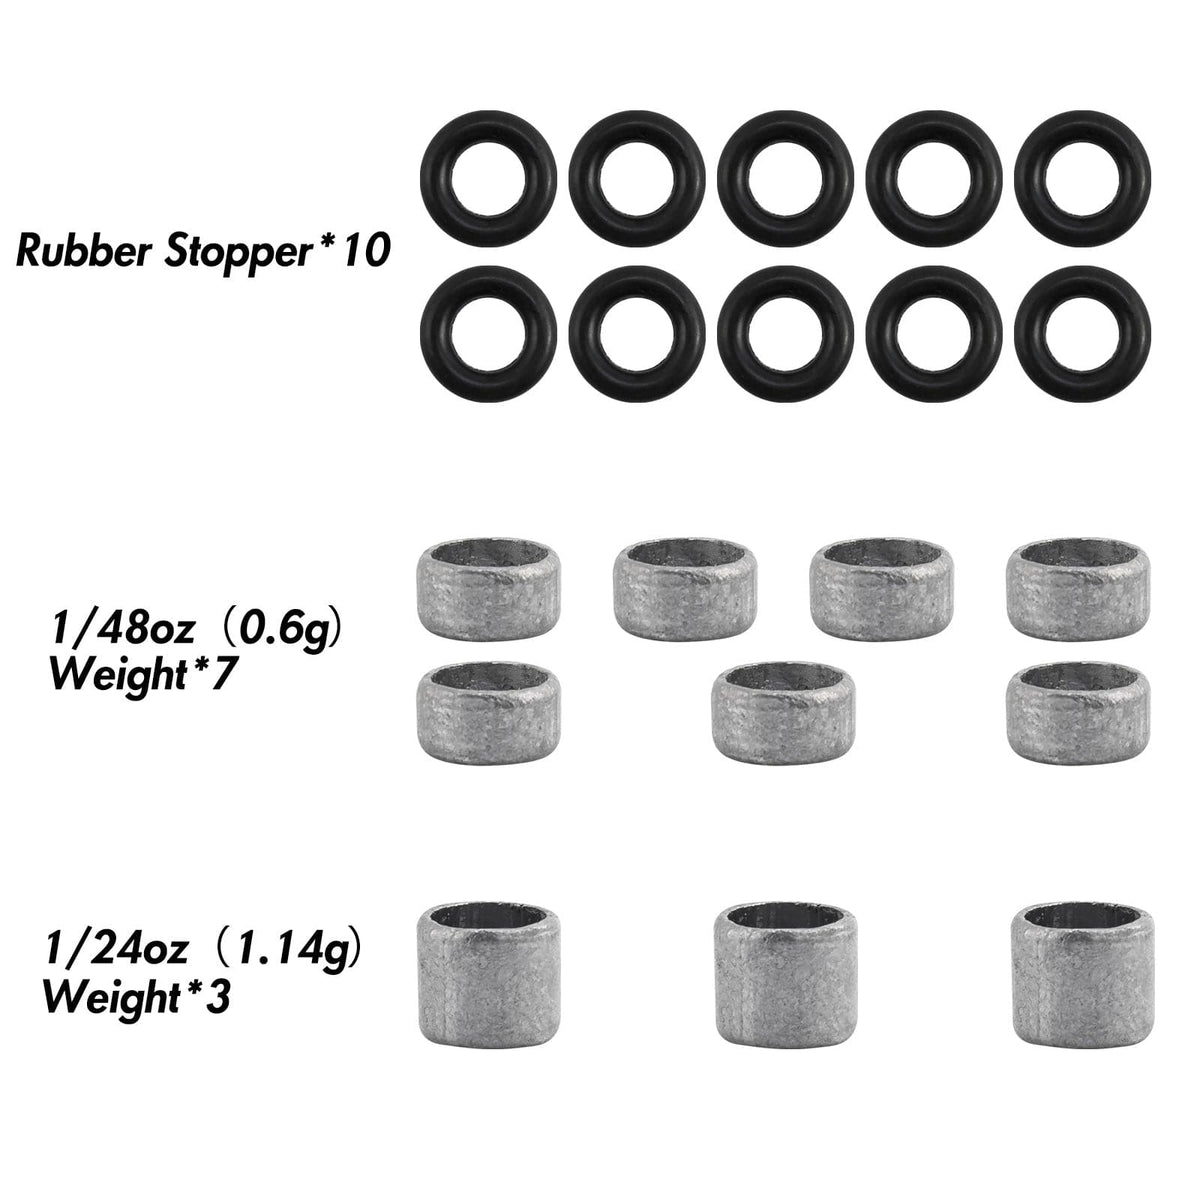 Dr.Fish 20pcs Weight & Rubber Stopper Kit